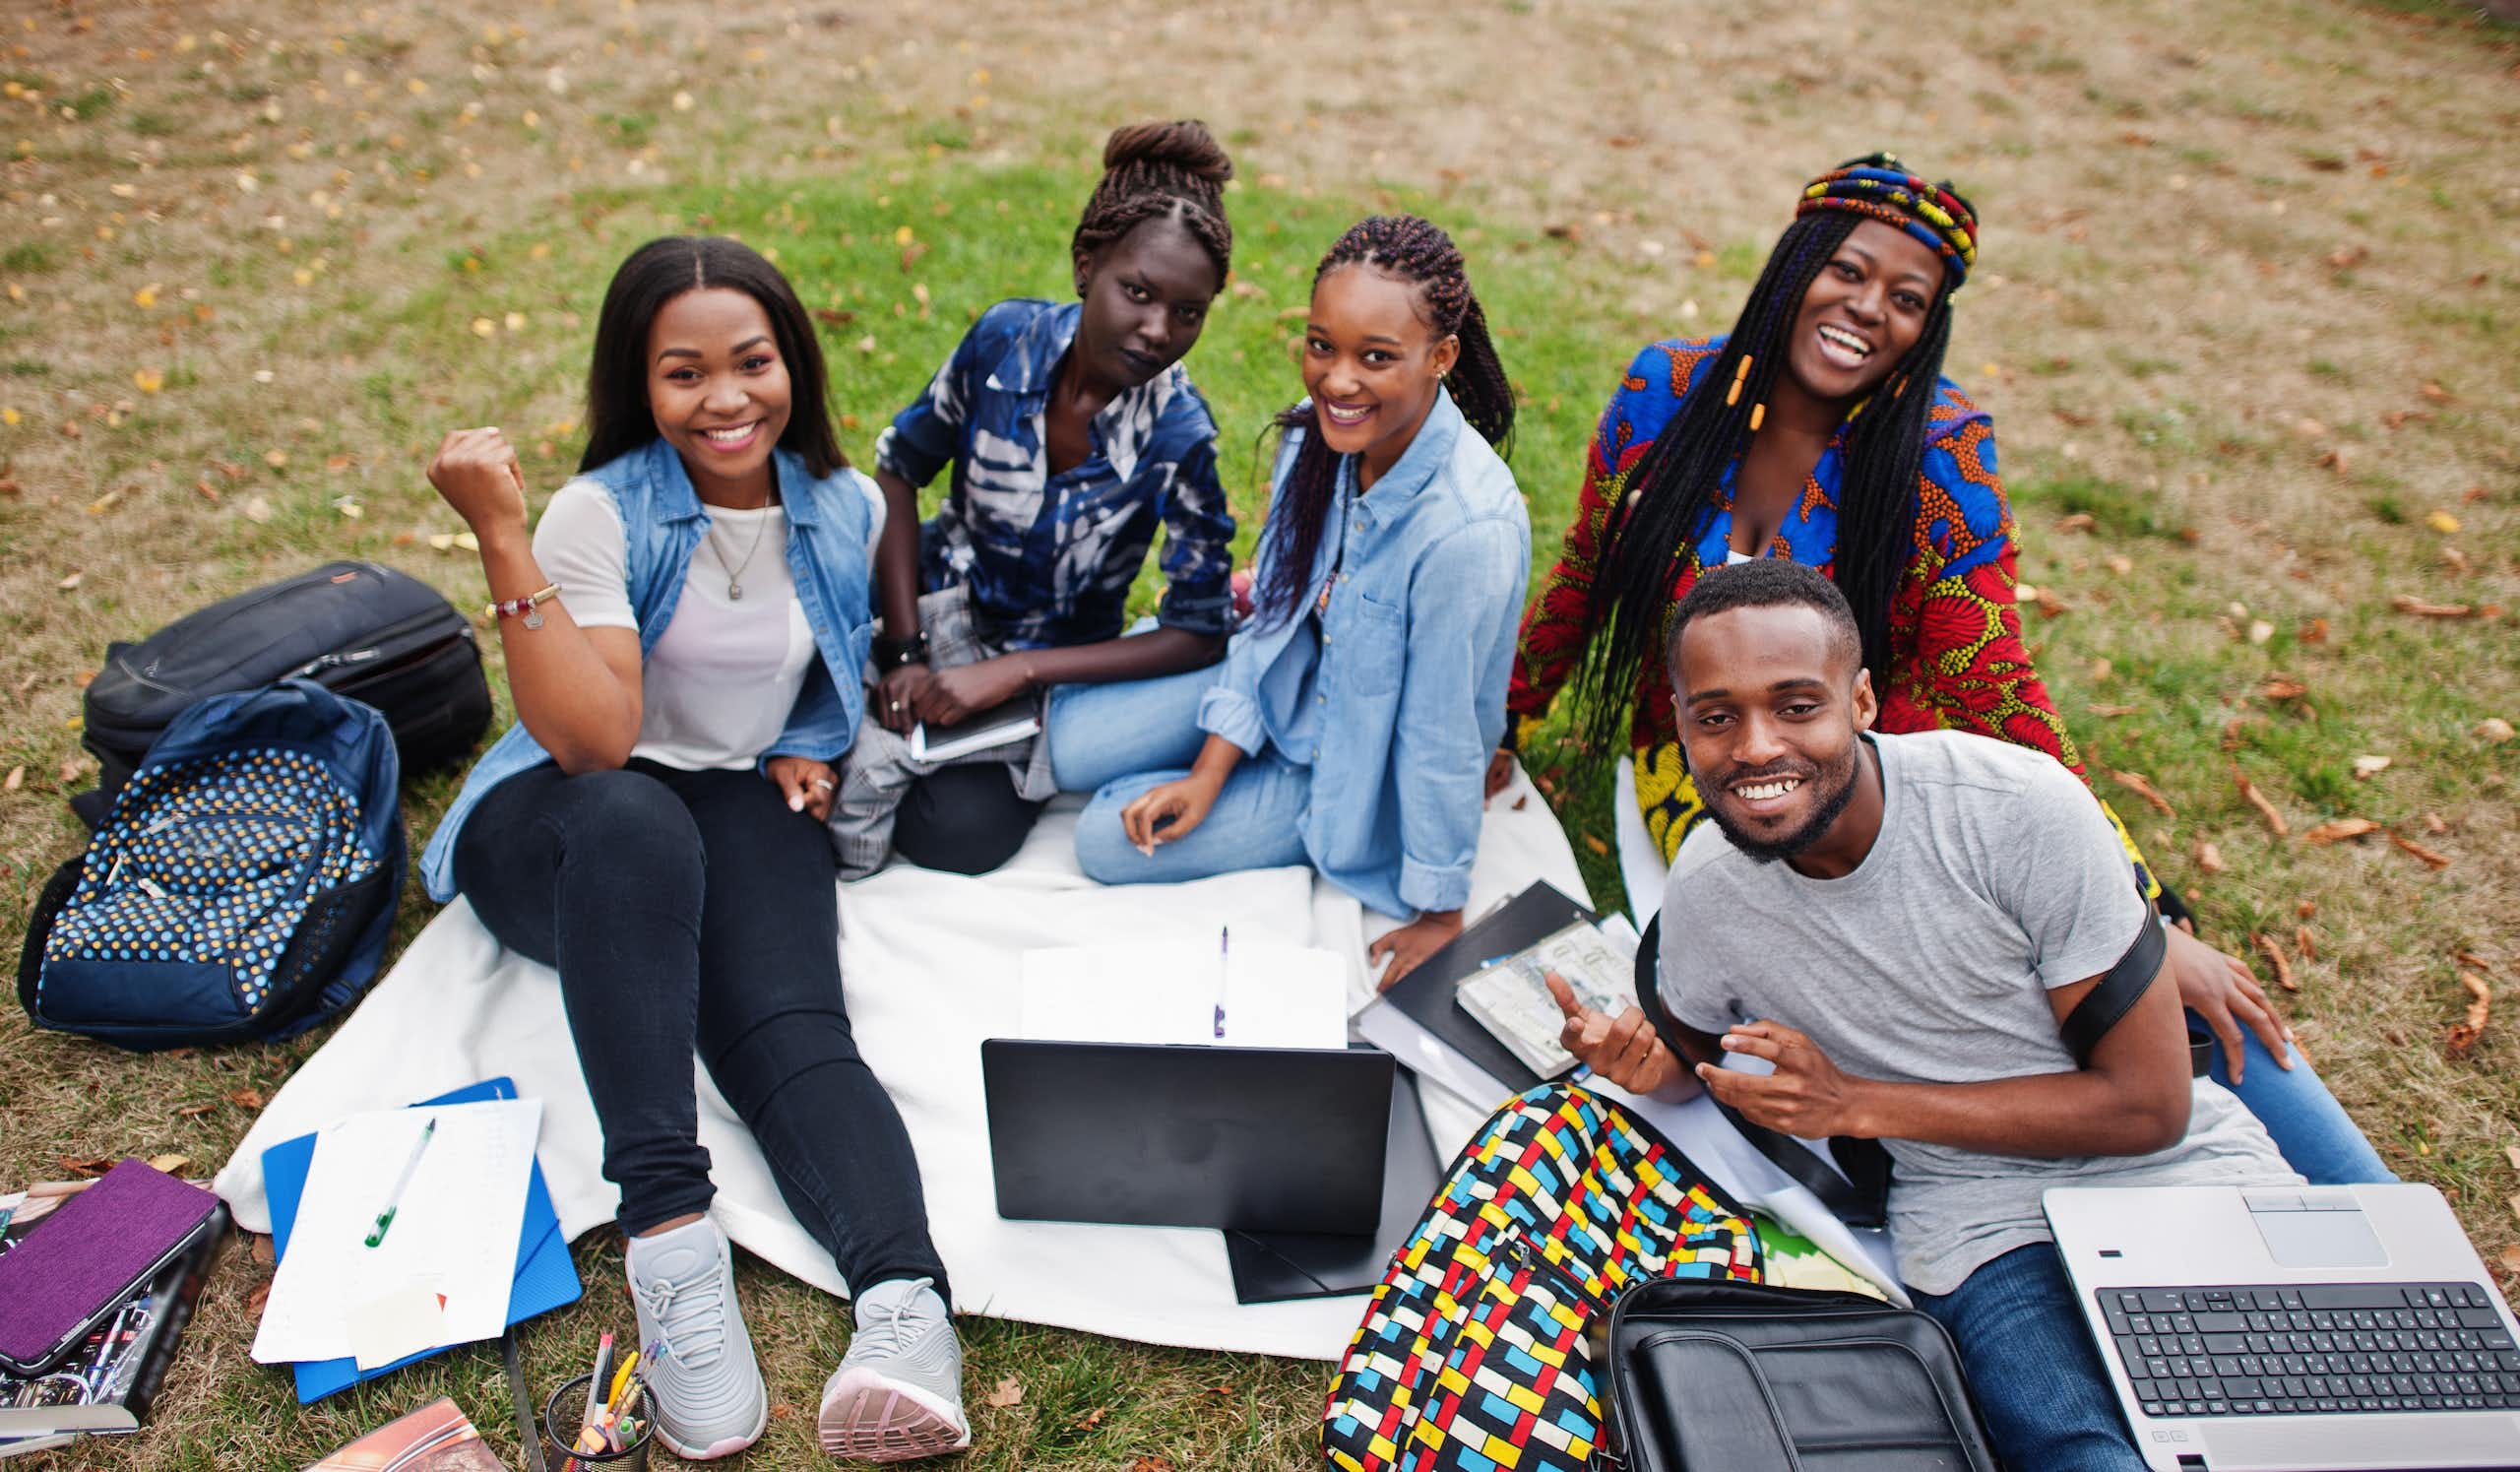 A group of Black students with laptops and knapsacks sitting outdoors.